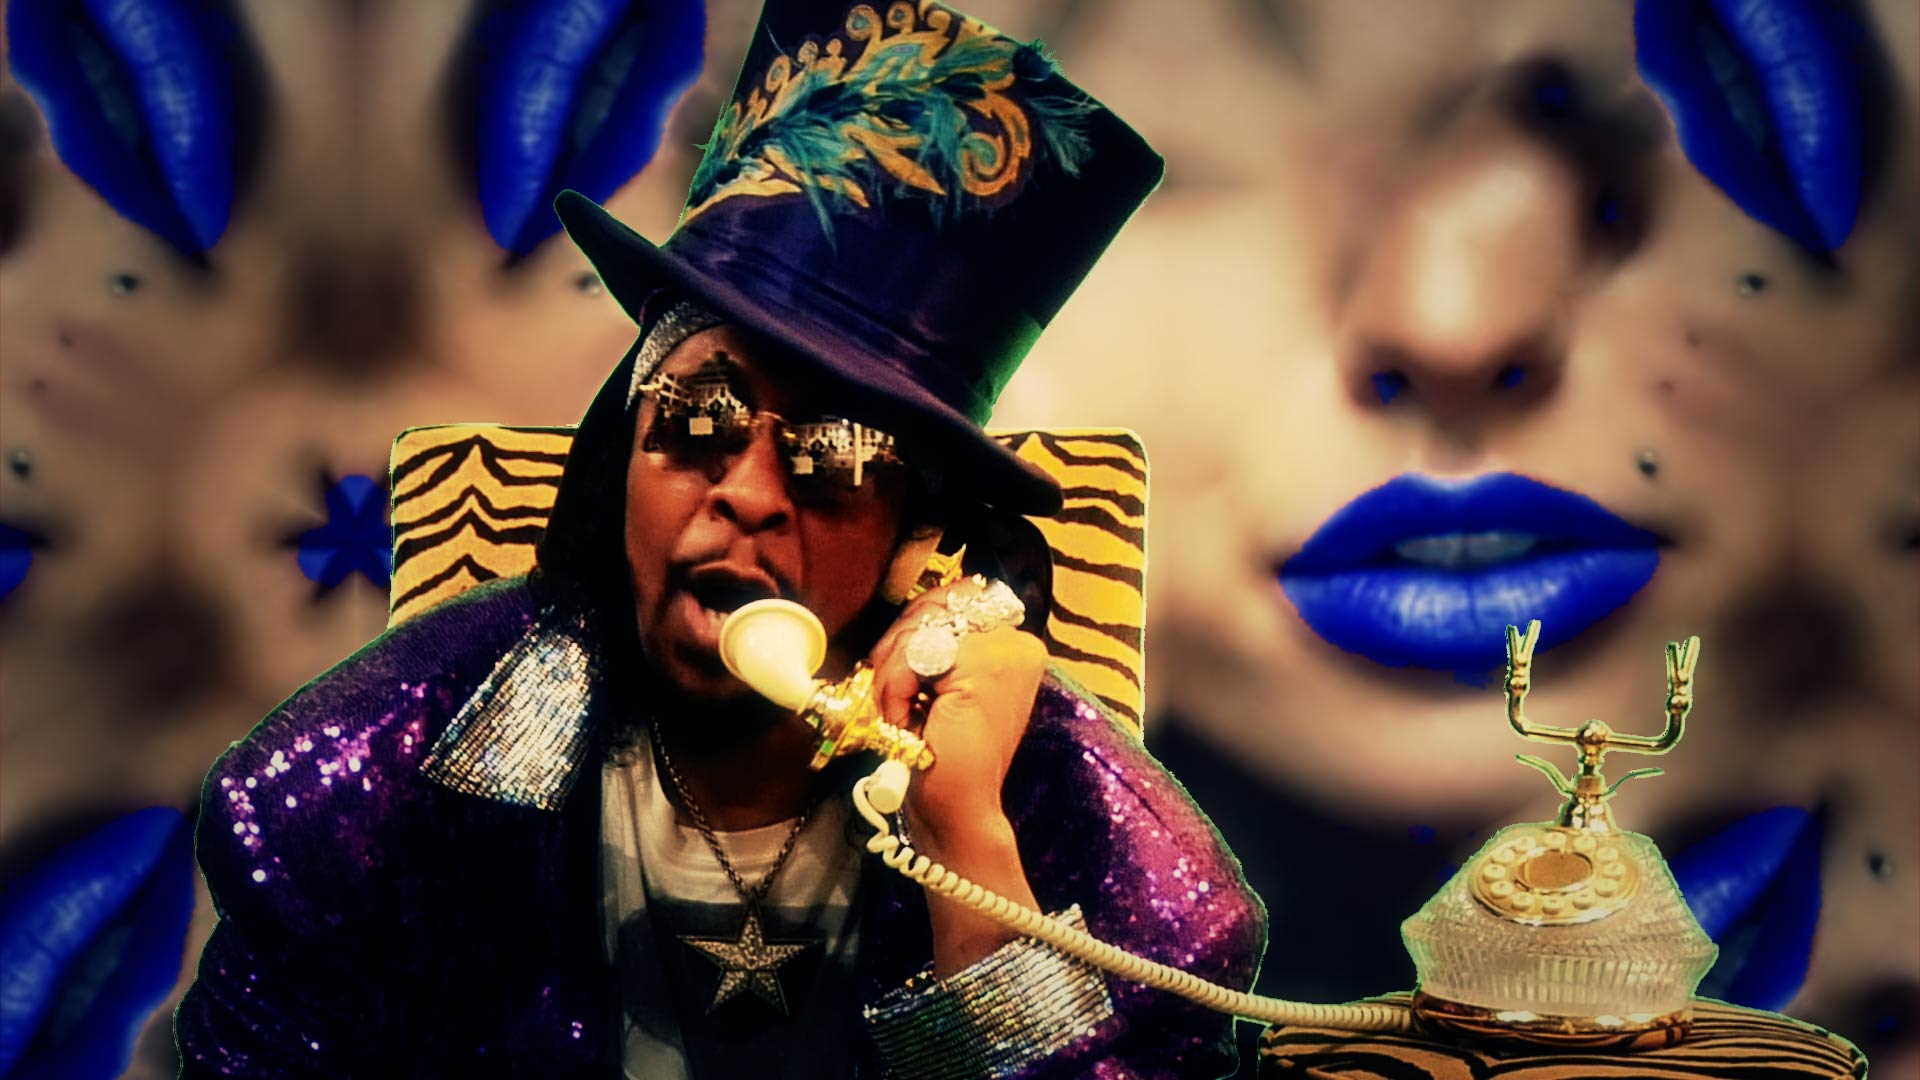 Bootsy Collins Wallpapers